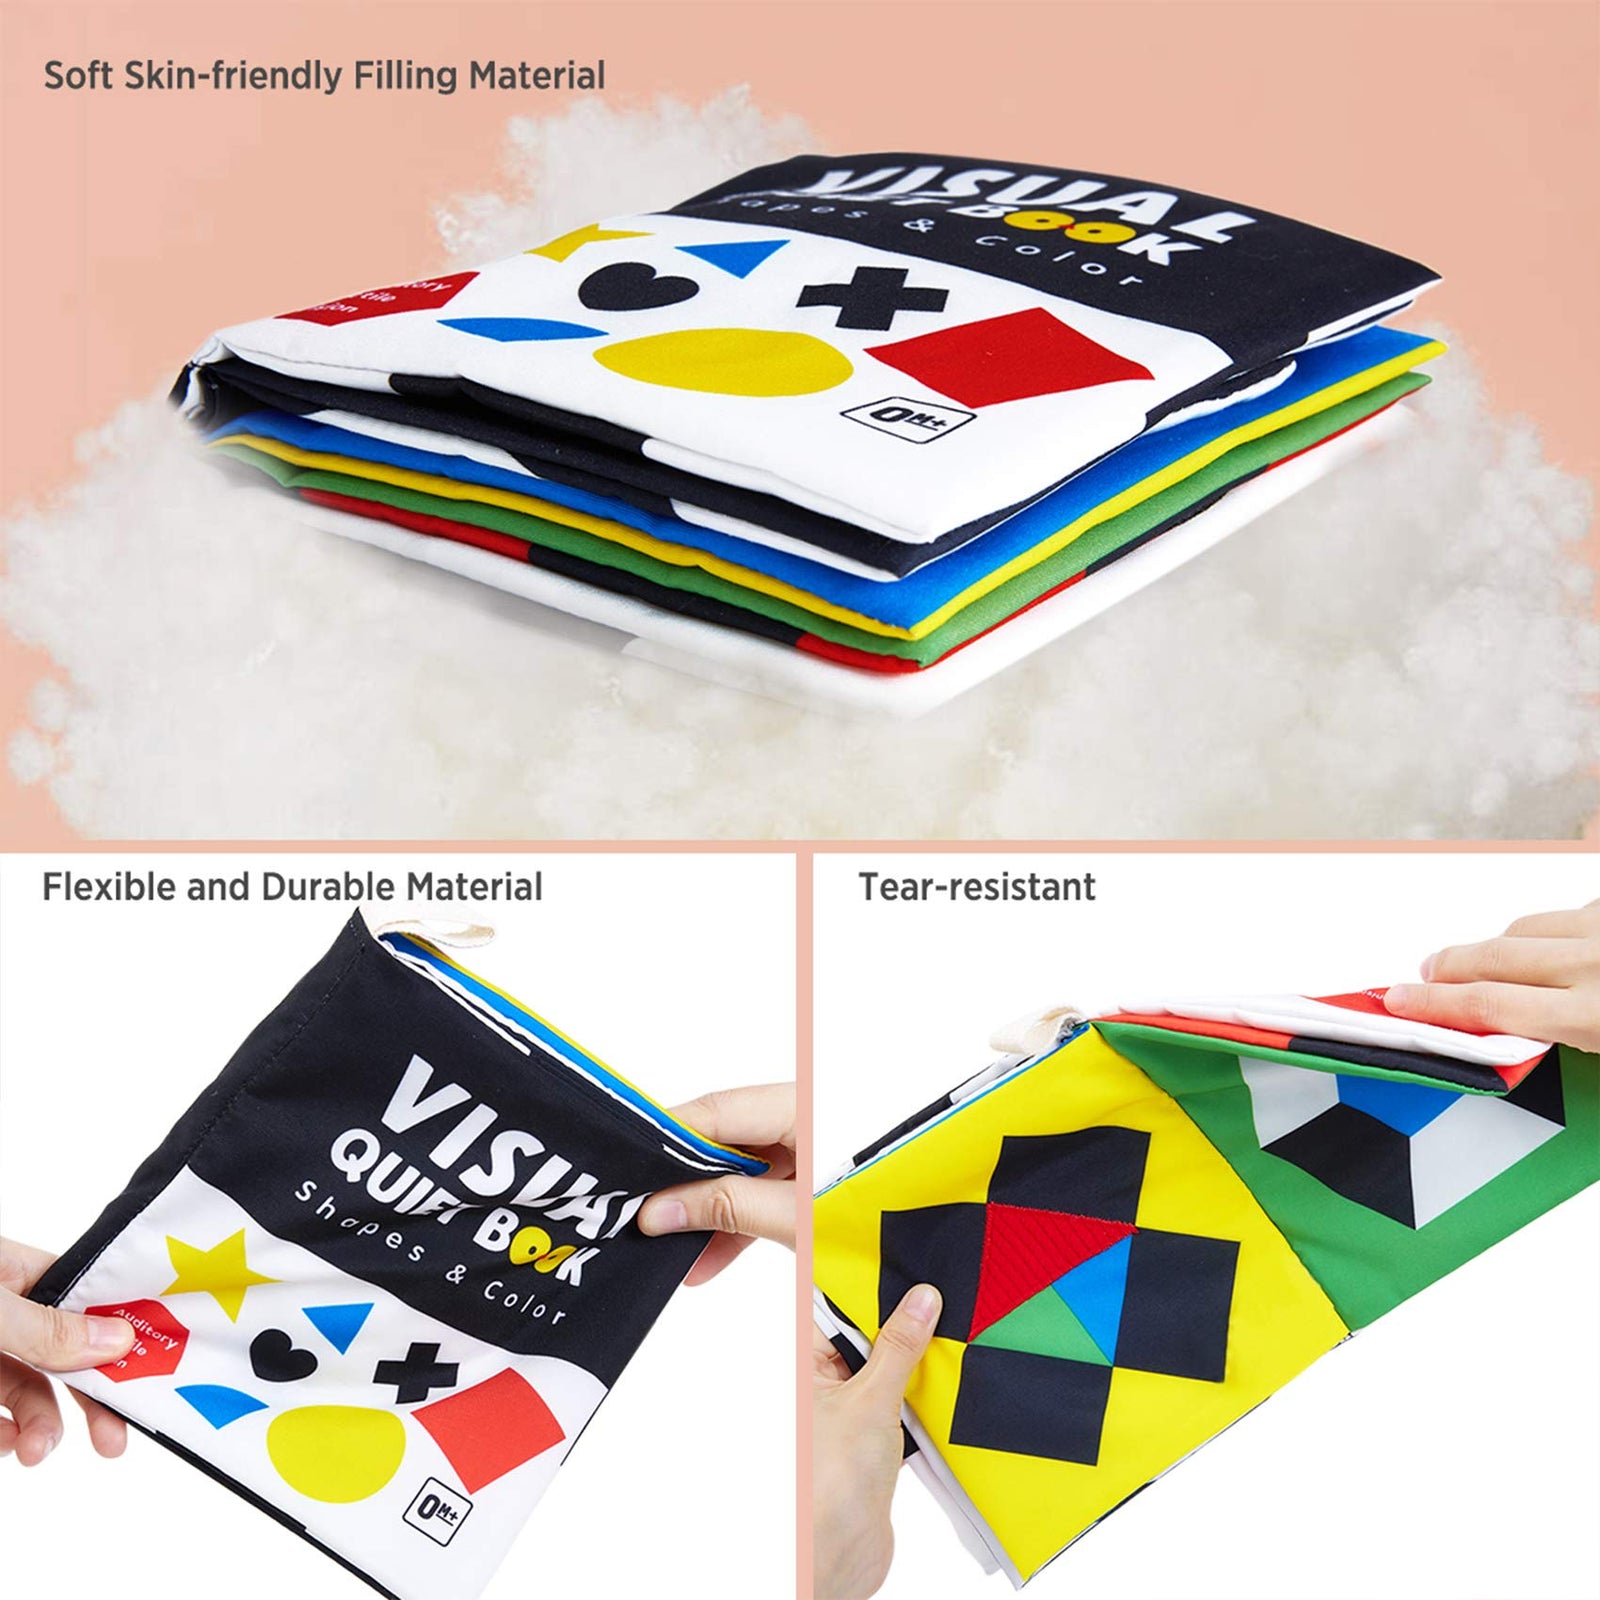 beiens Soft Baby Books, High Contrast Black and White Books Non Toxic Fabric Touch and Feel Crinkle Cloth Books Early Educational Stimulation Toys for Infants Toddlers, Baby Gift Stroller Toys